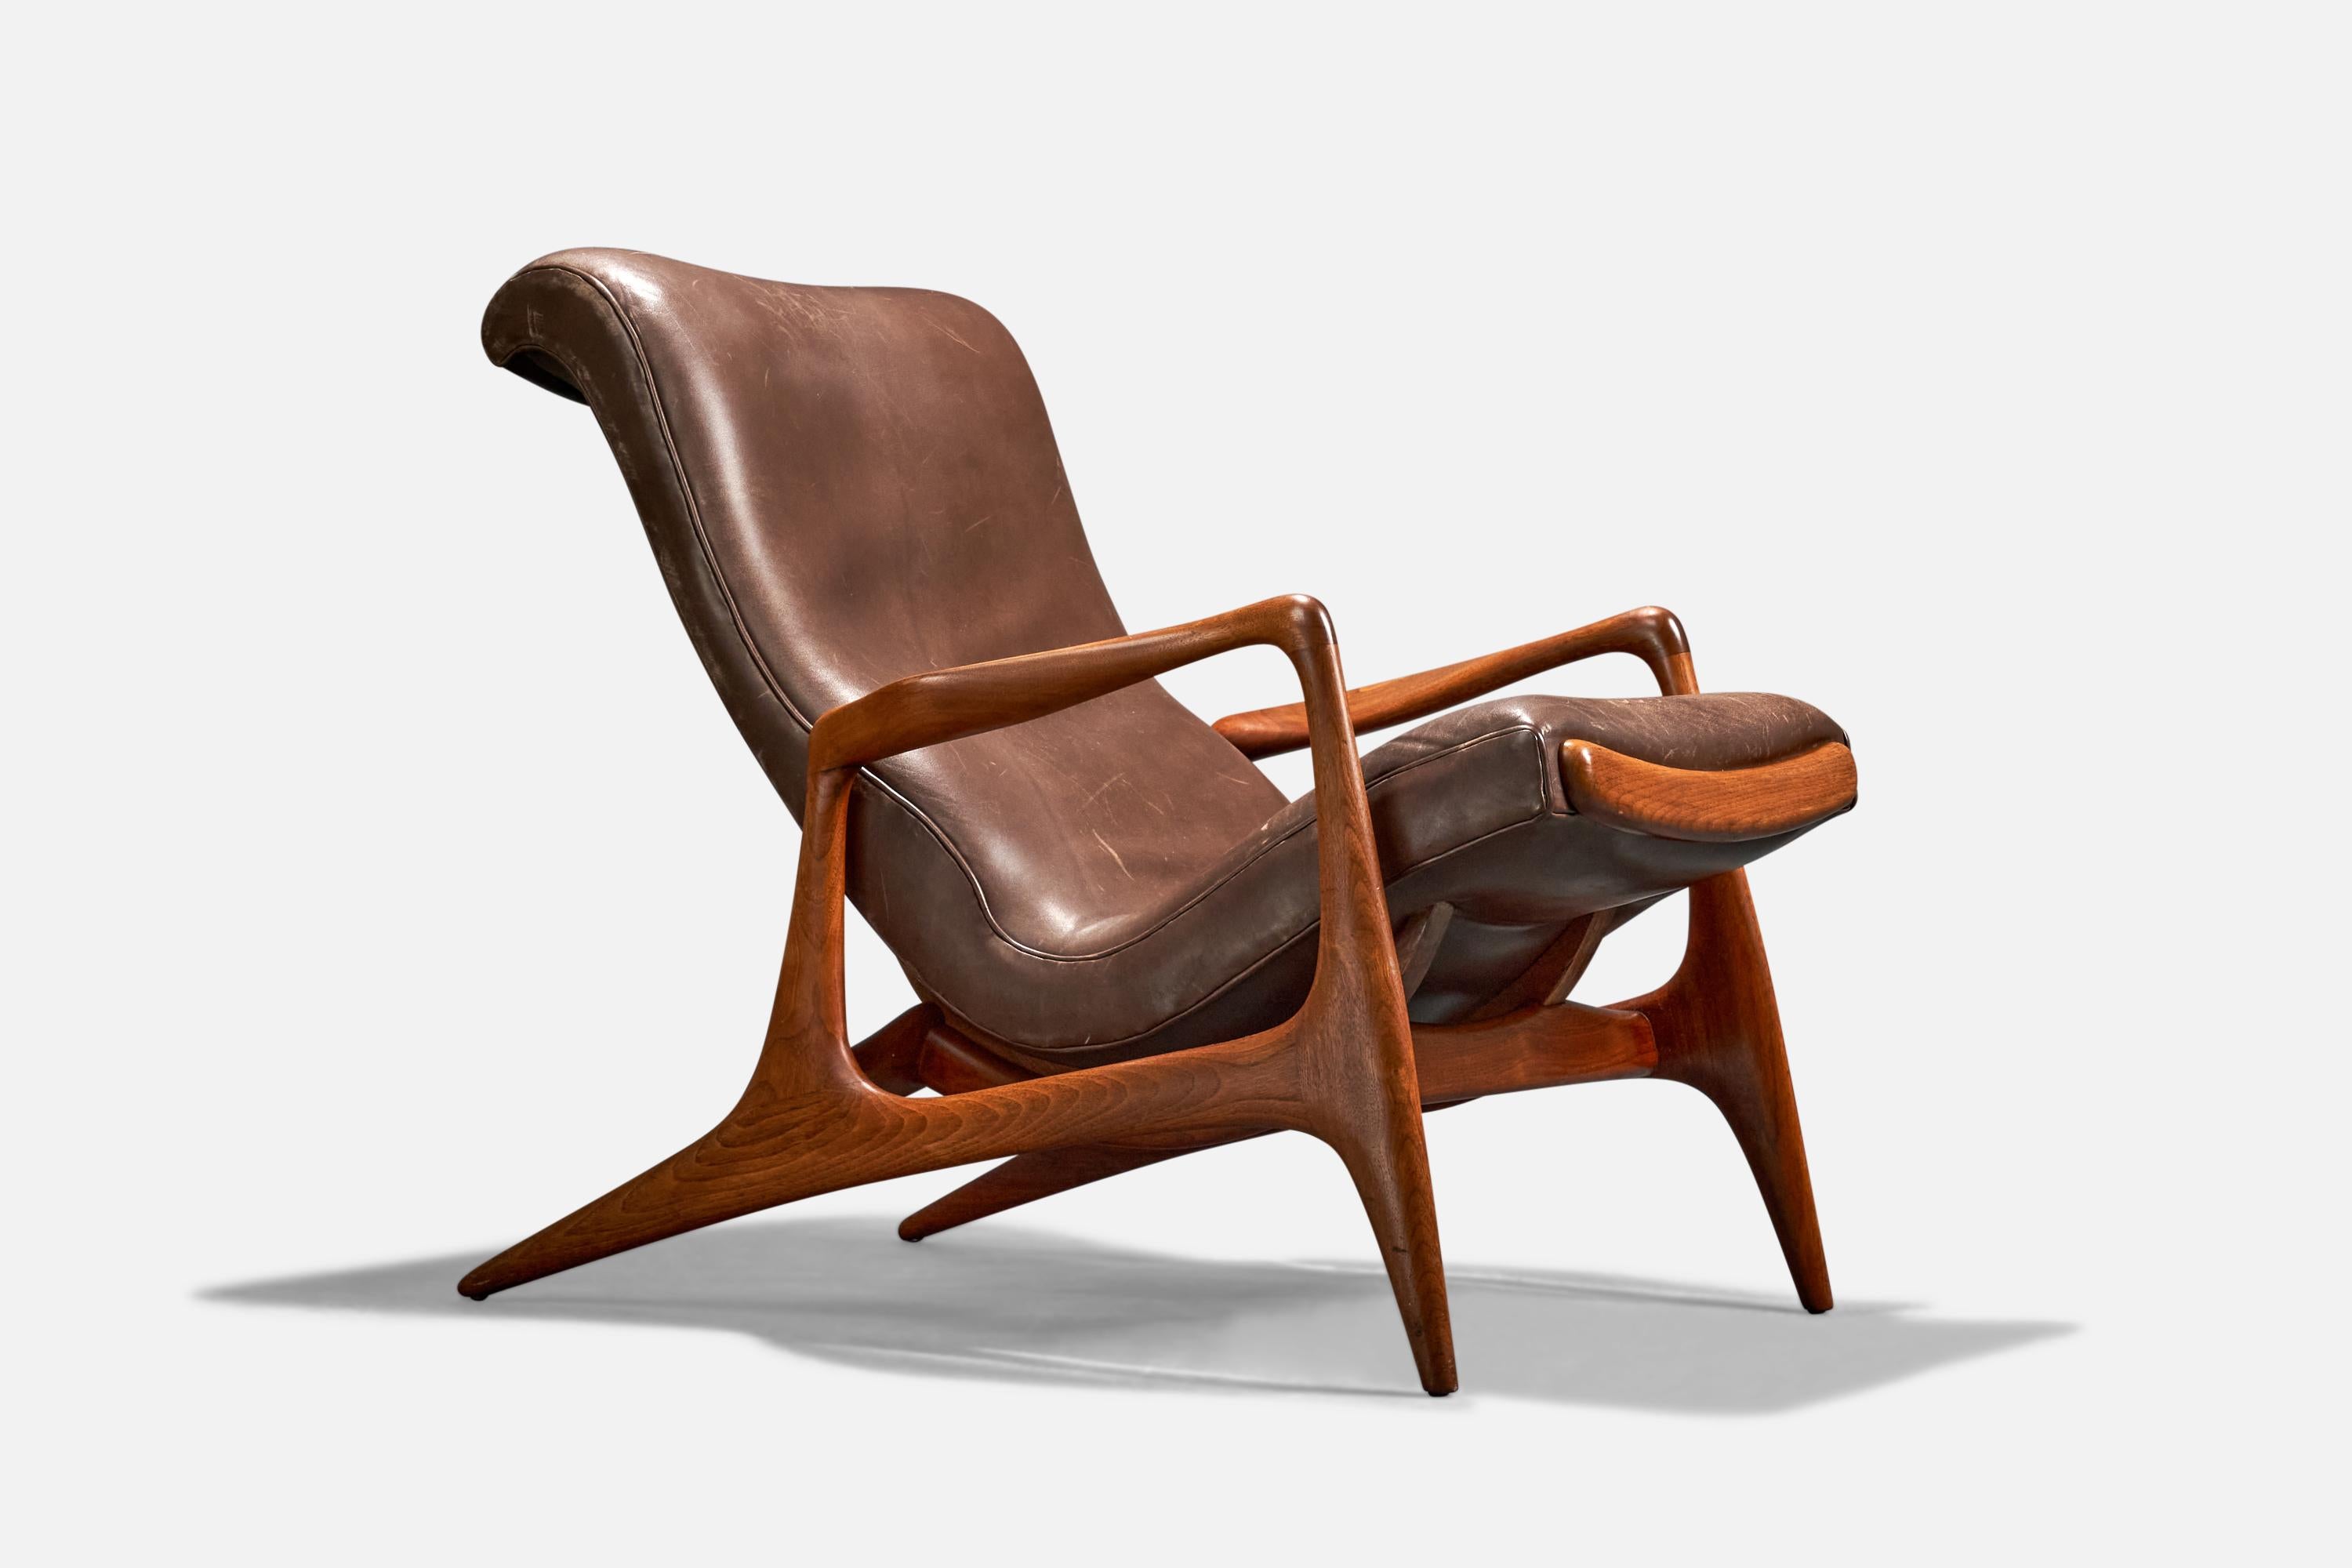 An adjustable, leather and walnut lounge chair designed by Vladimir Kagan and produced by Kagan-Dreyfuss, Inc, USA, 1956.

Dimensions of retractable foot rest at maximum extended position (inches) : 60.5